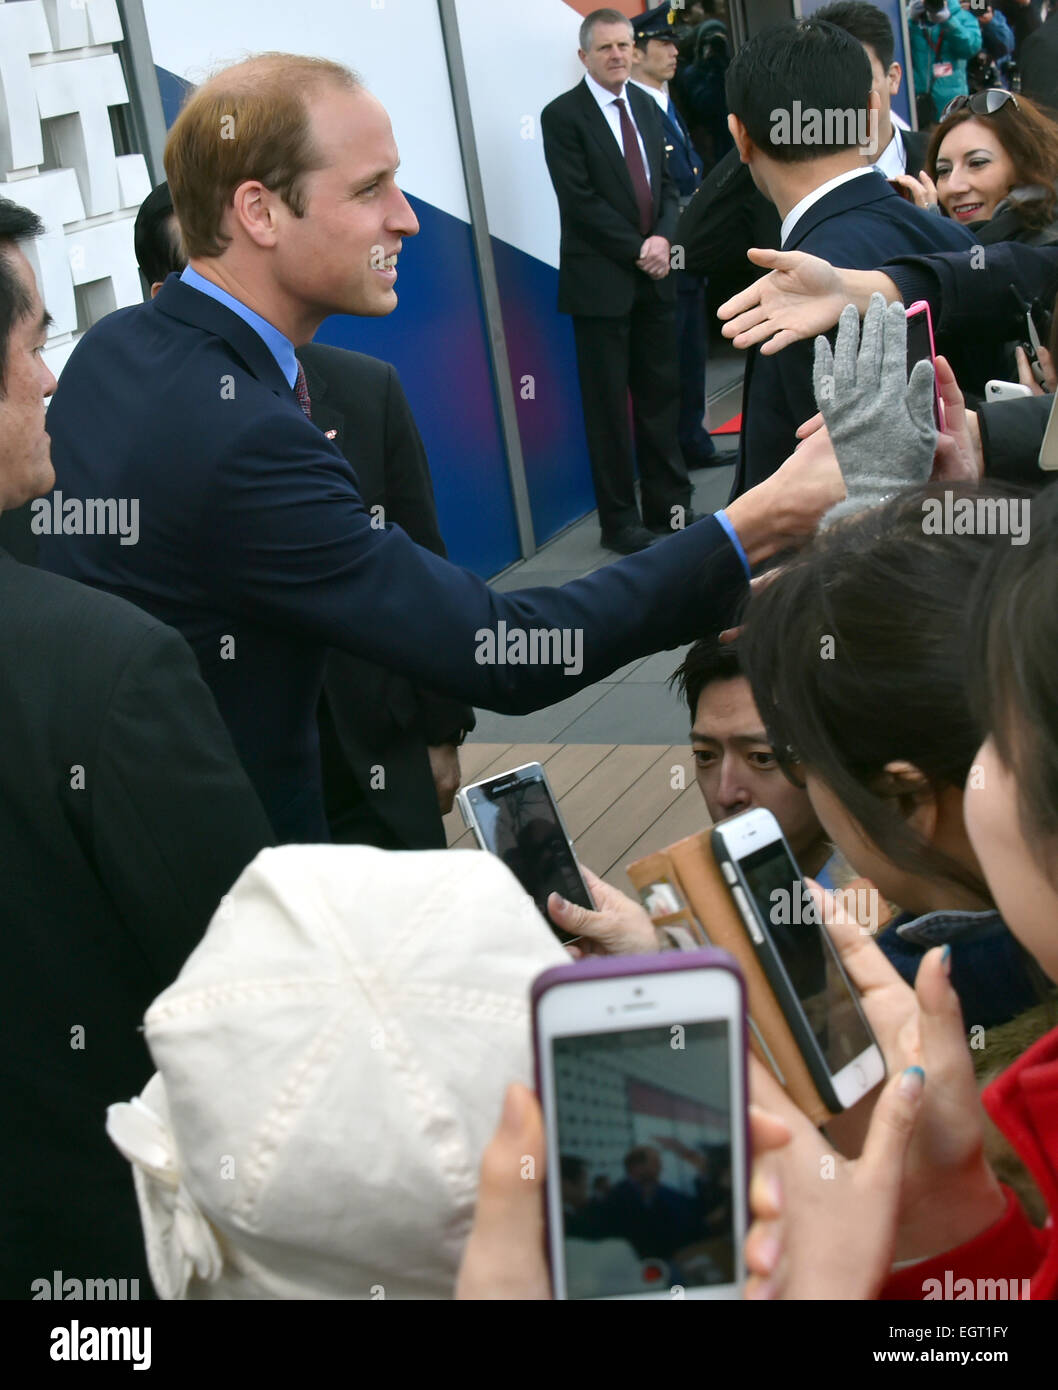 Tokyo, Japan. 28th Feb, 2015. Britain's Prince William is greeted by a throng of Japanese upon his visit to the British Fair in Tokyo's upscale Daikanyama neighborhood on Saturday, February 28, 2015. The second-in-line to the British throne arrived in Japan on Thursday without his pregnant wife, Duchess of Cambridge, on a four-day visit including a trip to Fukushima before leaving for Beijing on Sunday. © Natsuki Sakai/AFLO/Alamy Live News Stock Photo